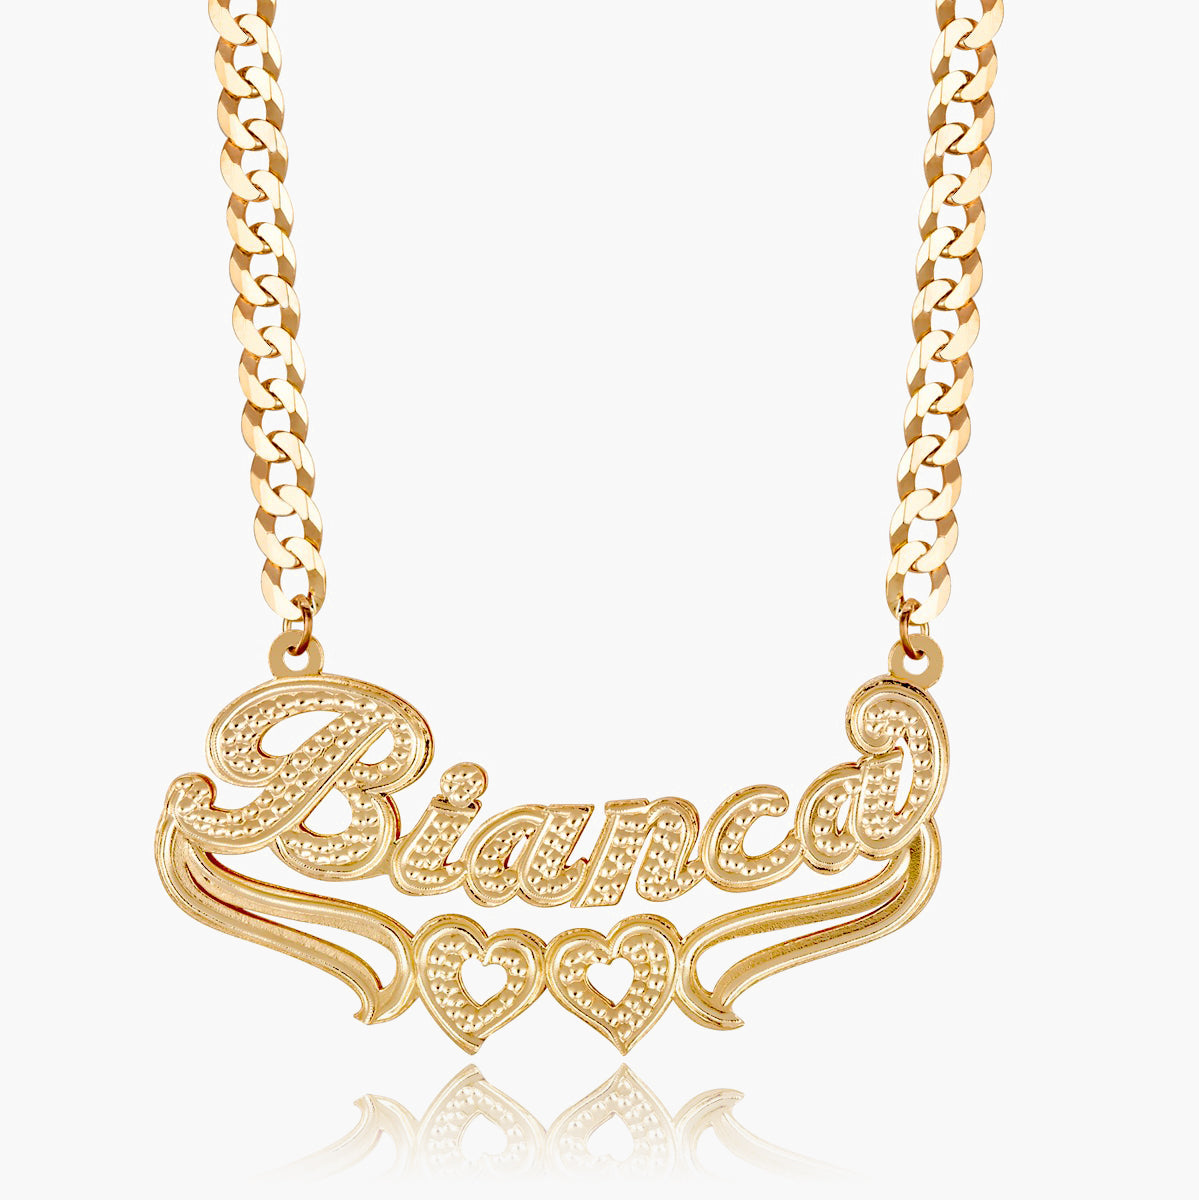 The Golden Double Plated Heart Name Necklace